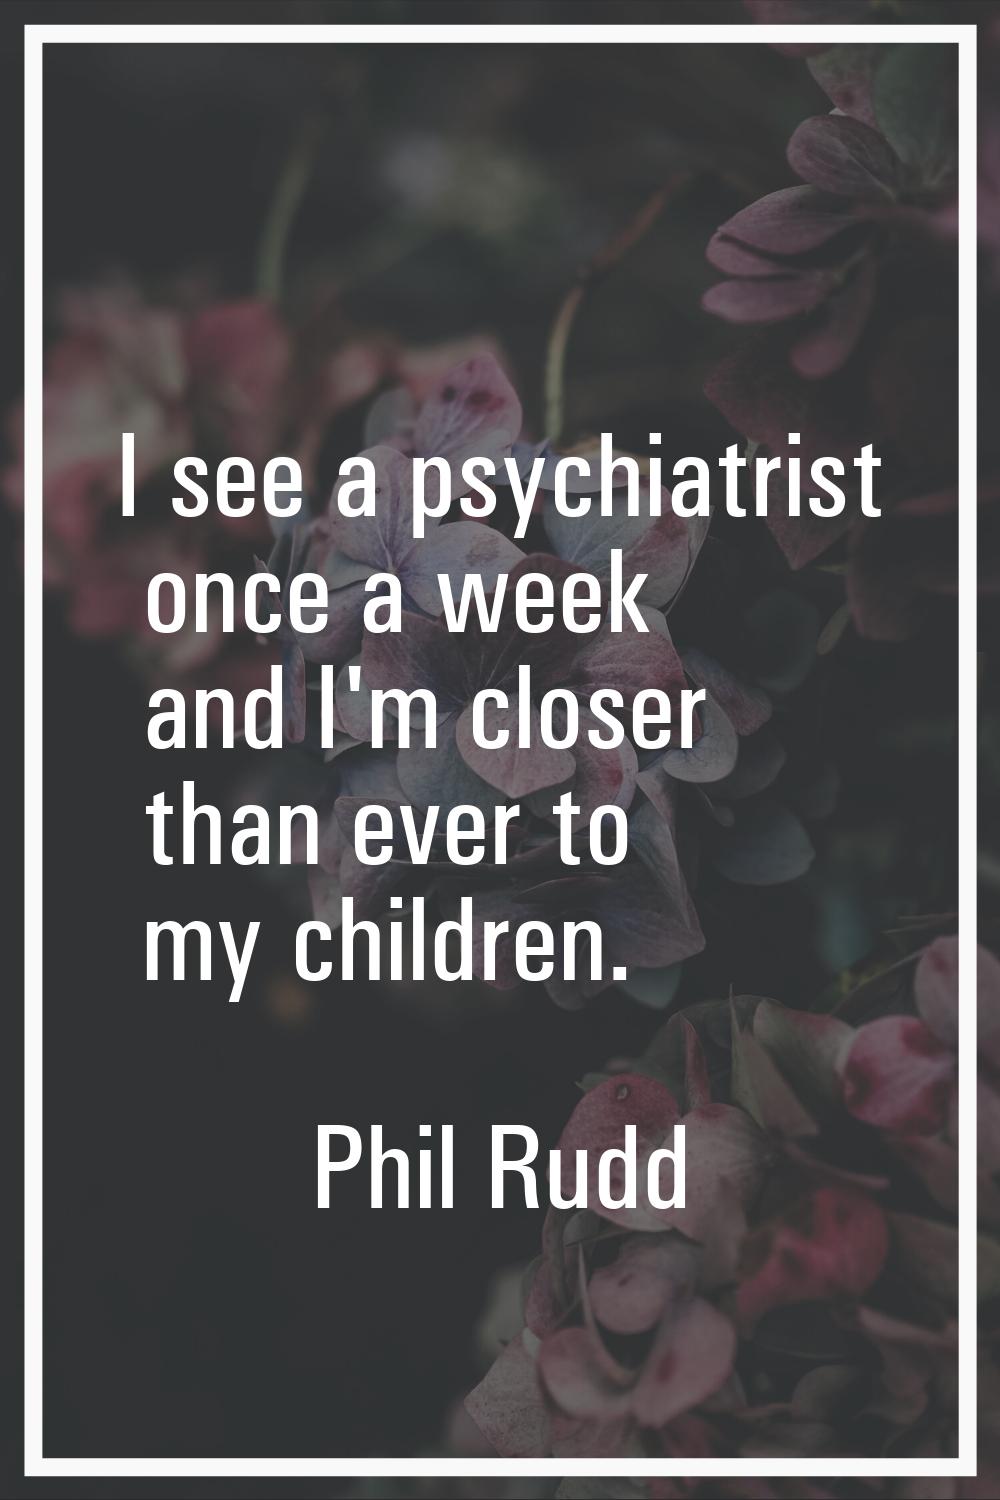 I see a psychiatrist once a week and I'm closer than ever to my children.